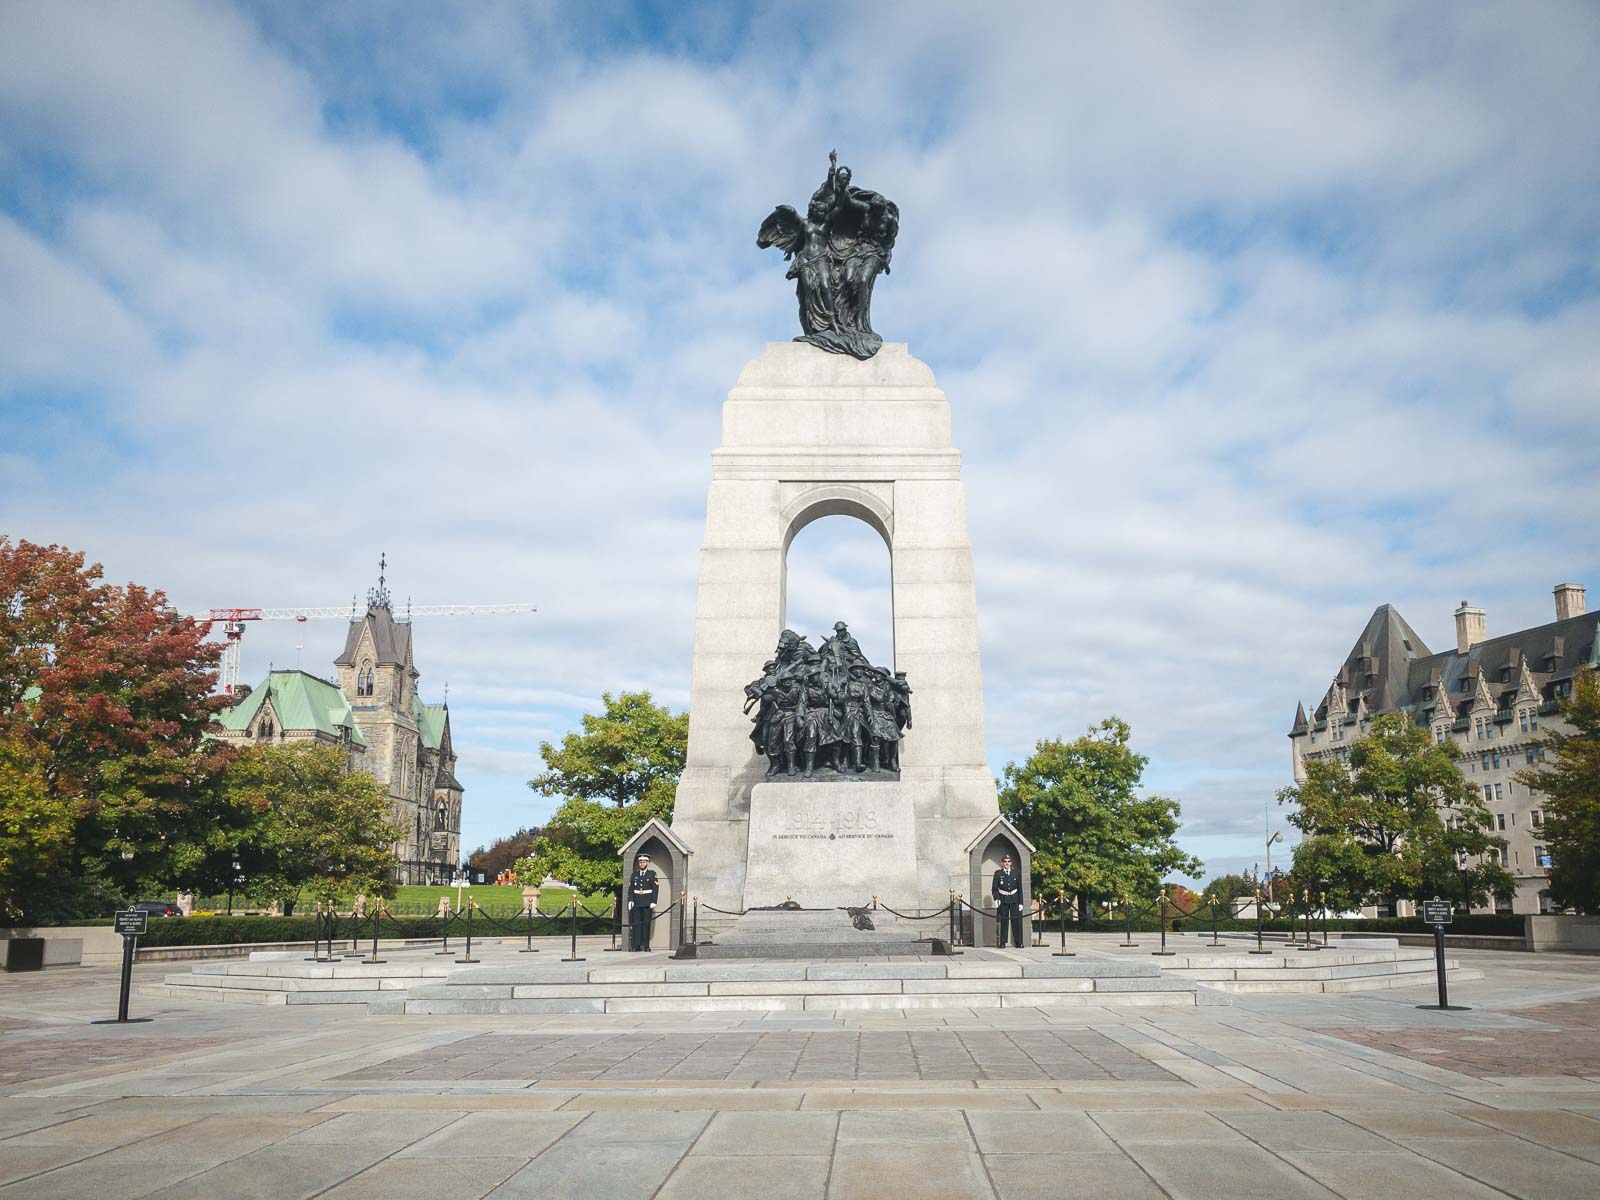 Full day tour in Ottawa with Le Boat